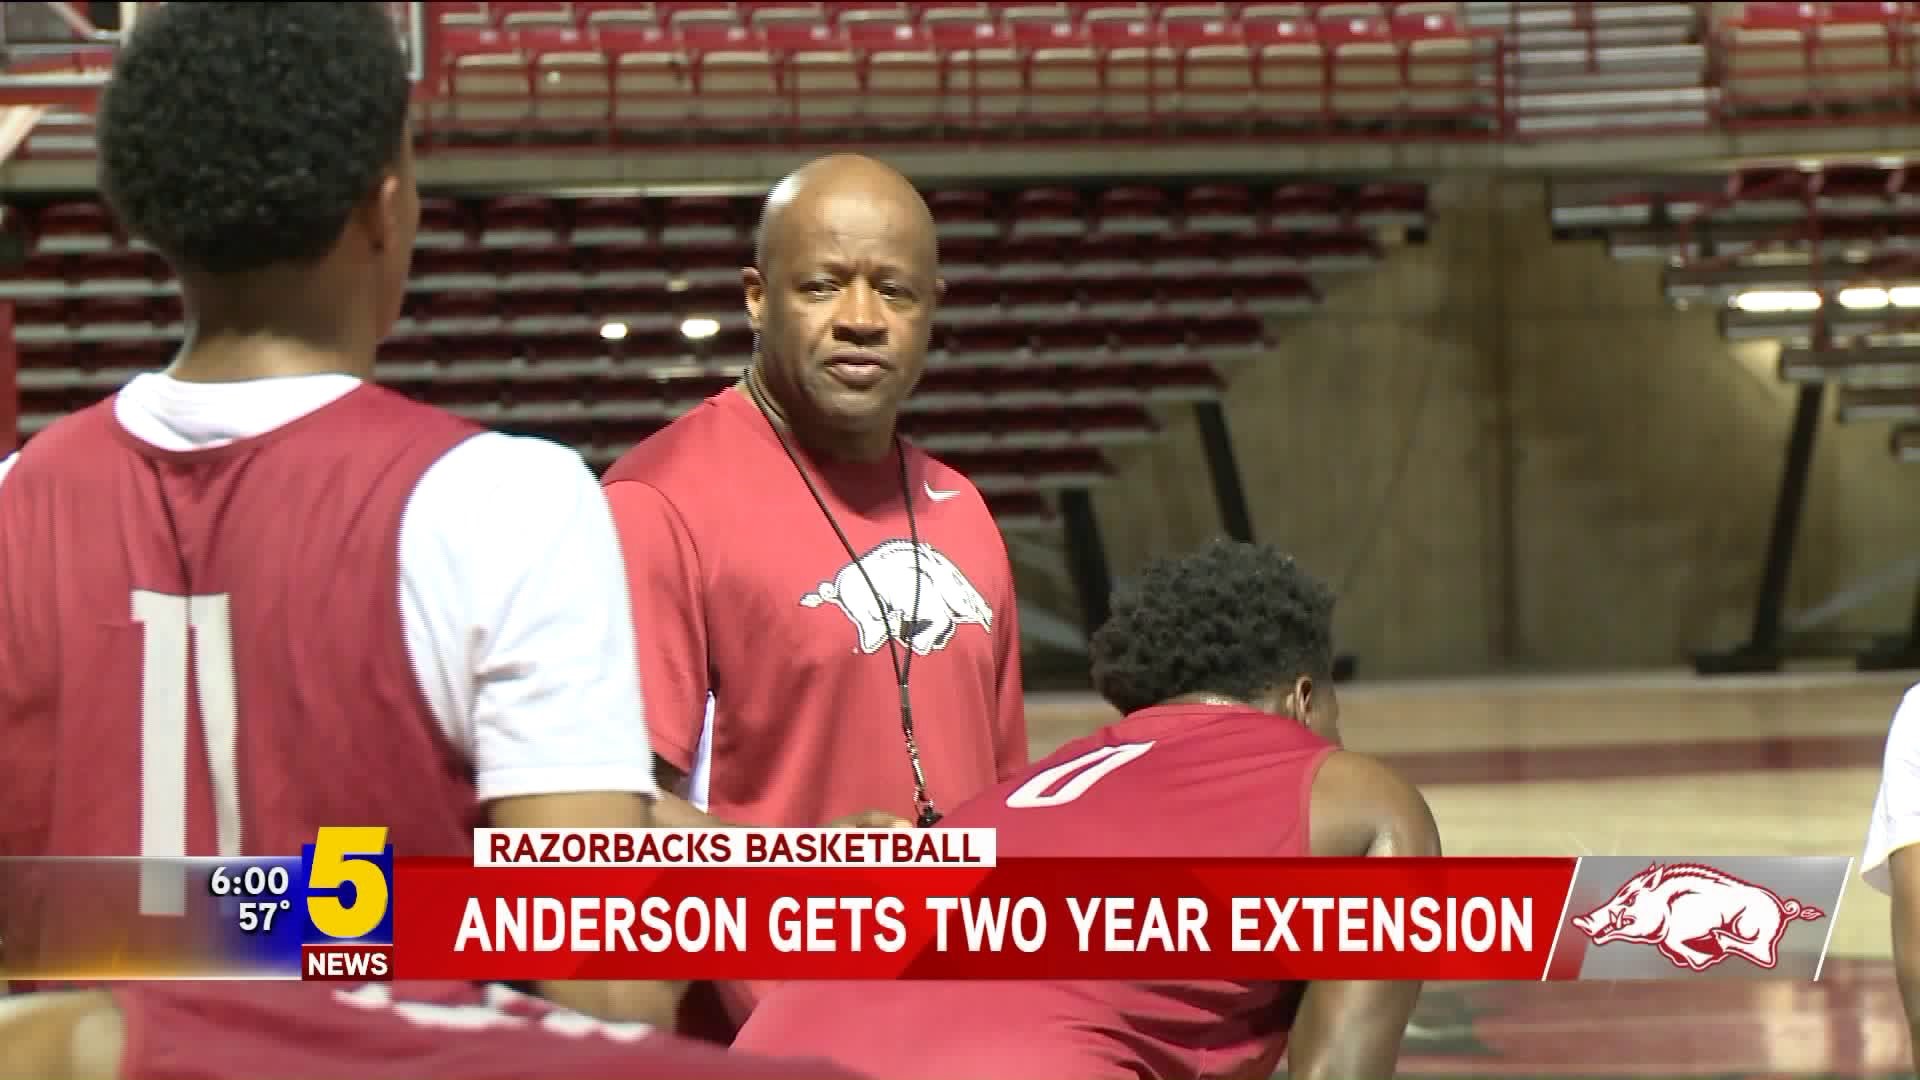 Anderson Gets Two Year Extension